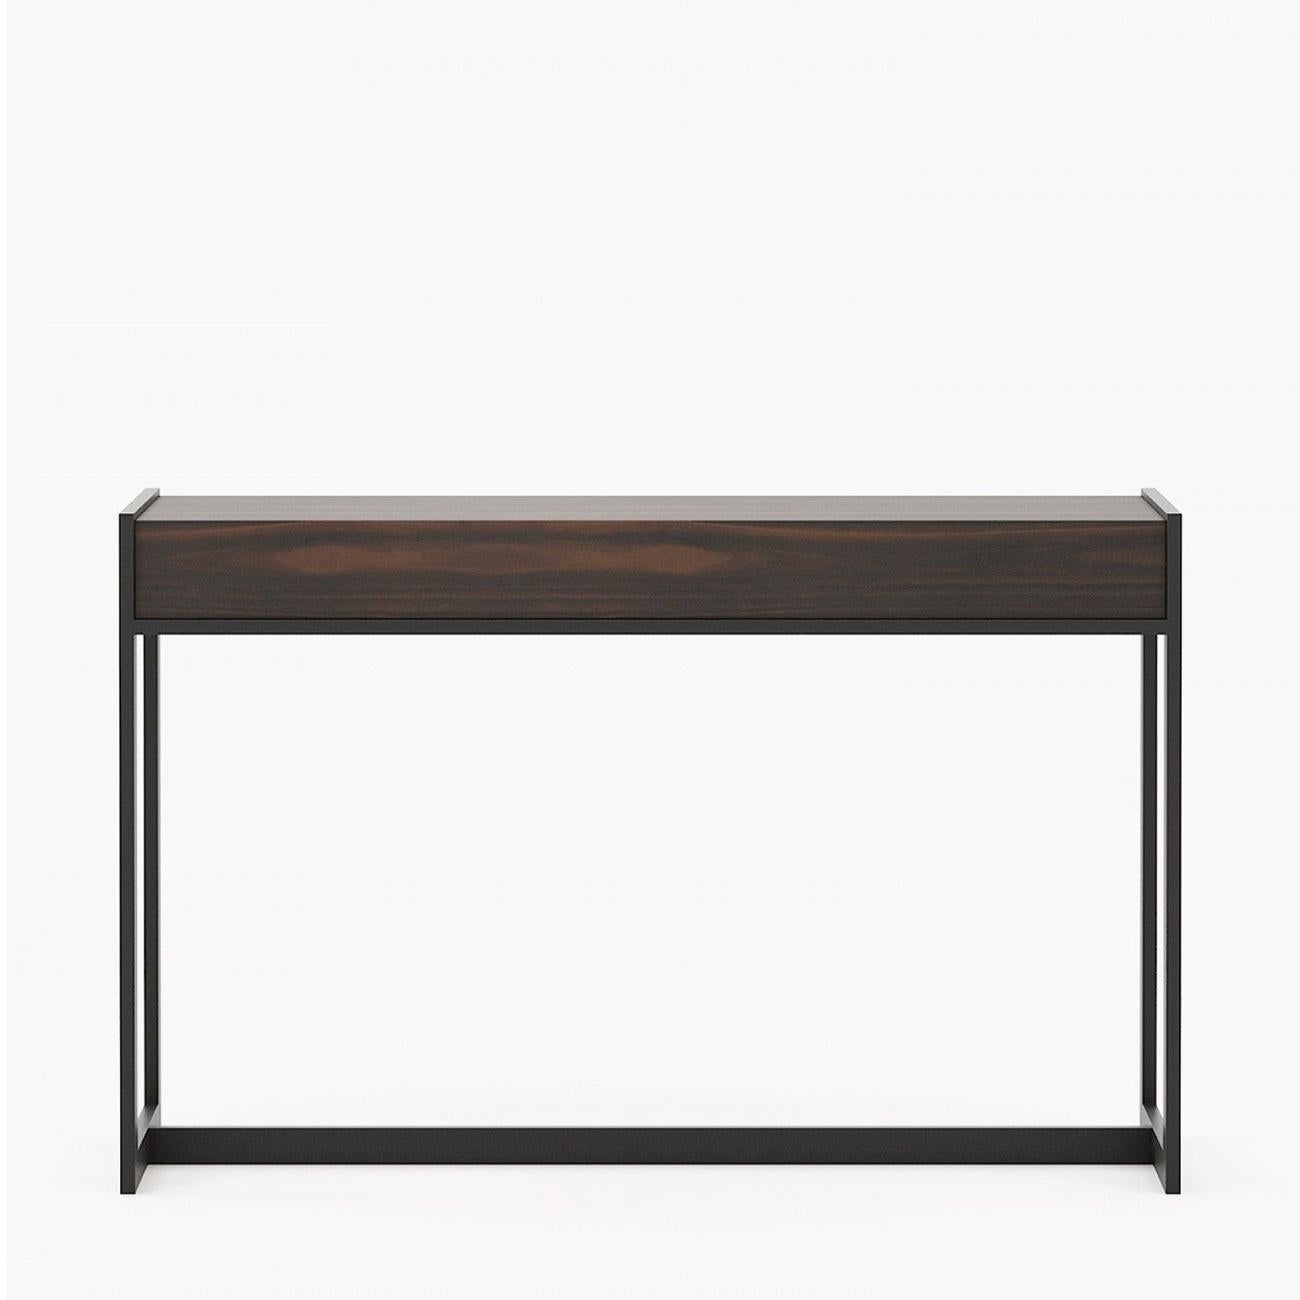 Console table Tanja wood with smocked eucalyptus veneer top and
with steel structure in black matte finish.
Also available on request in ebony matte finish, or grey oak matte finish,
or natural oak finish, or rosewood matte finish, or in walnut